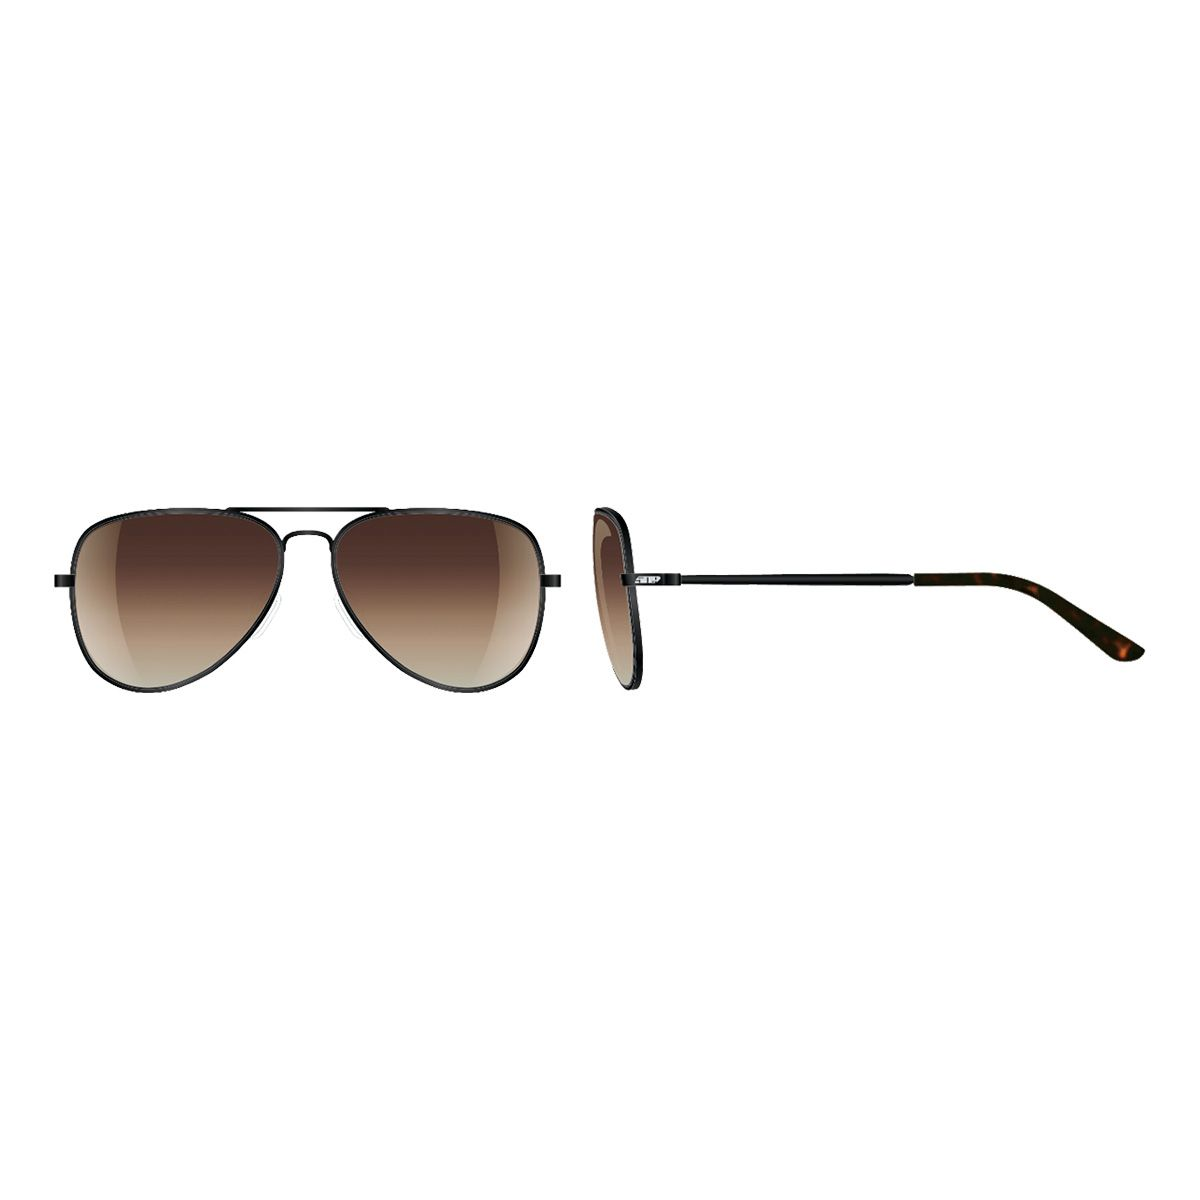 509 sunglasses for mens adult authority